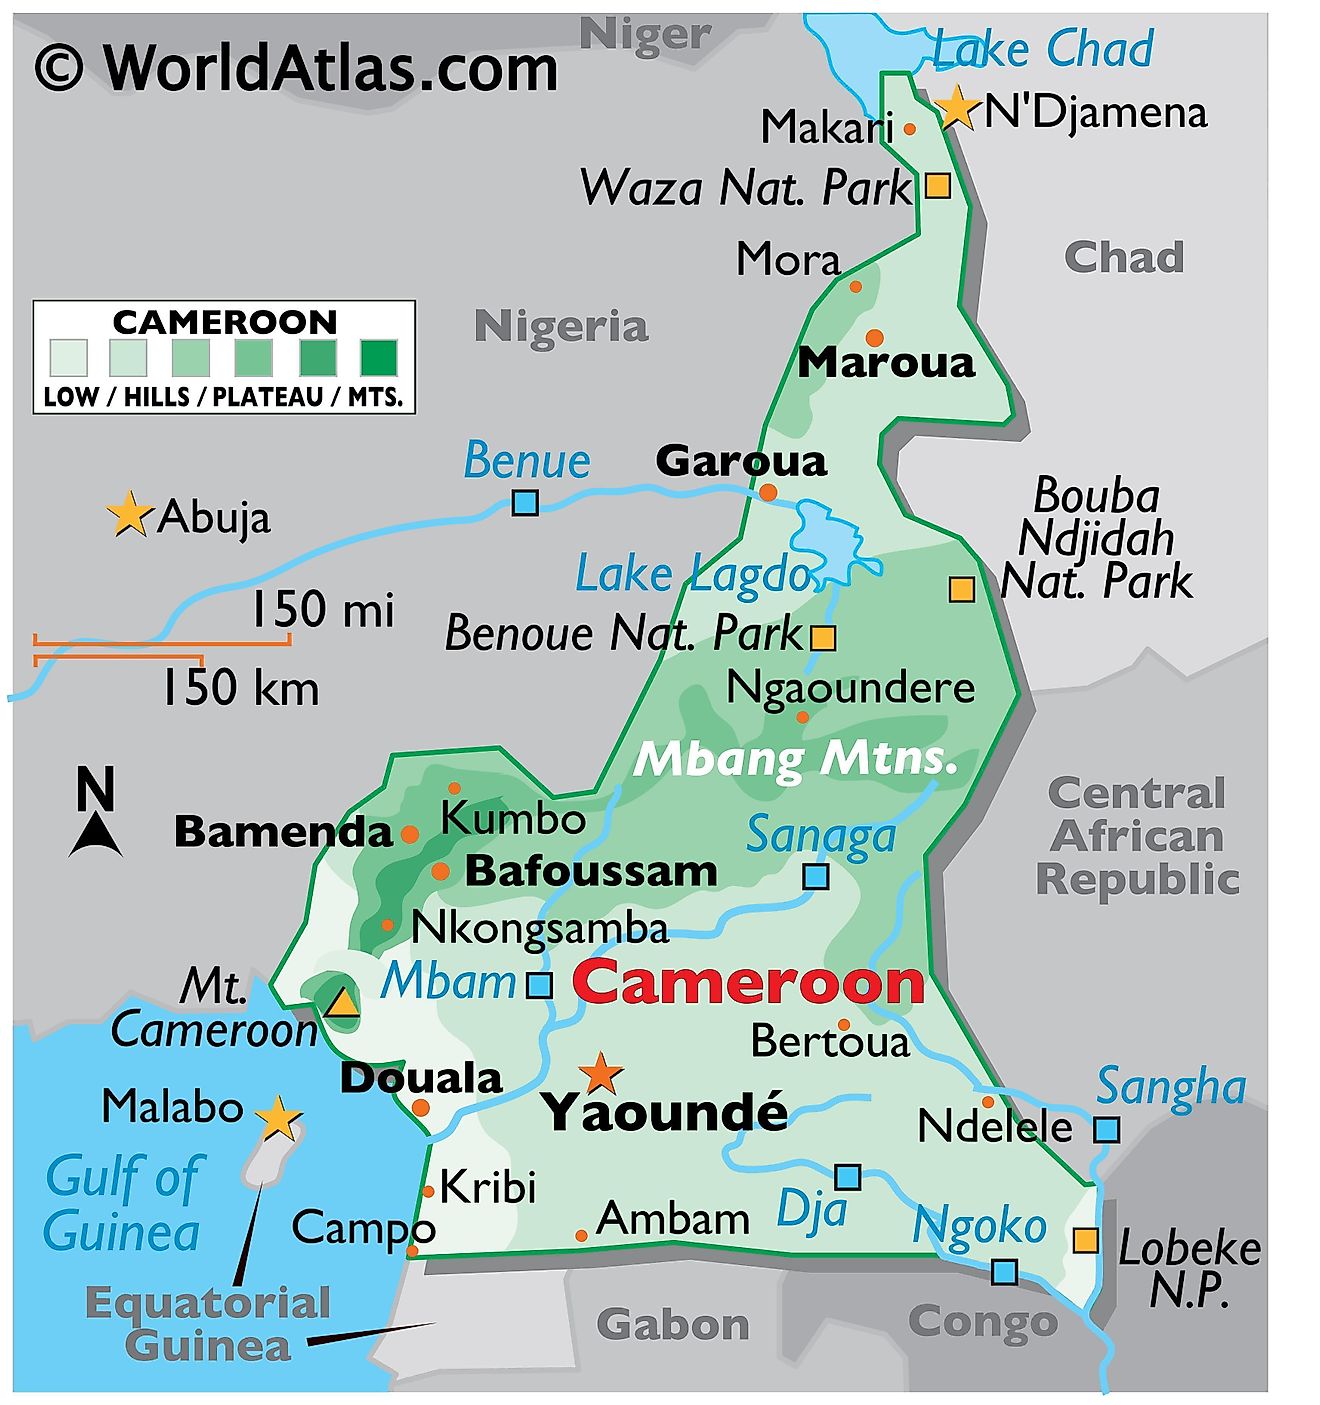 Physical Map of Cameroon with state boundaries. The map shows the important physical features like relief, extreme points, major rivers, lakes, national parks, and cities.